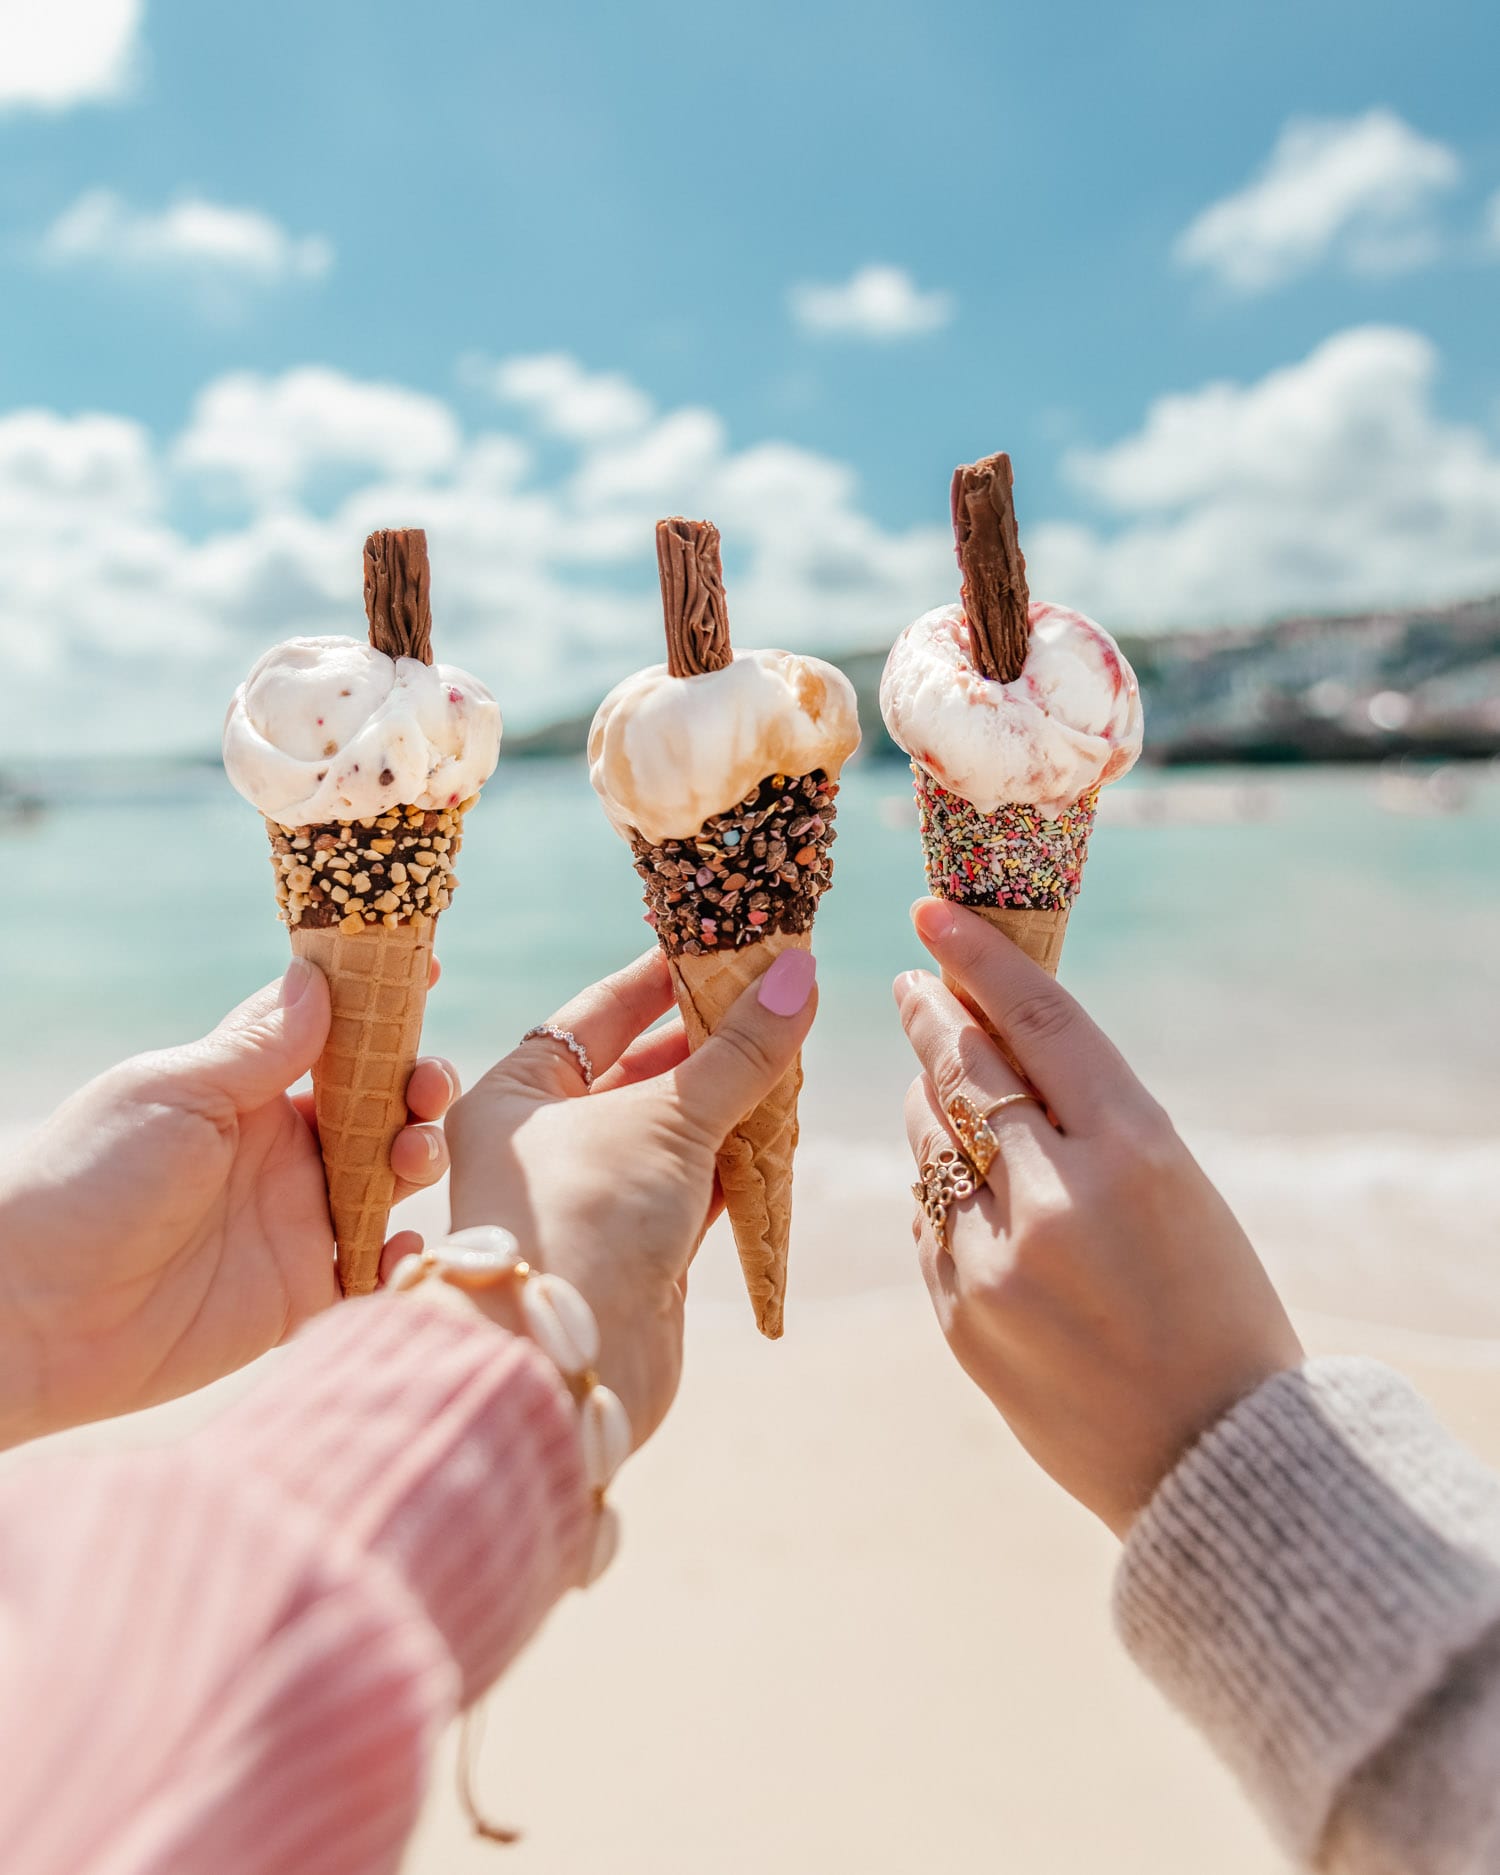 Moomaid of Zennor - Instagrammable Cornish Ice Cream, Cornwall, St Ives